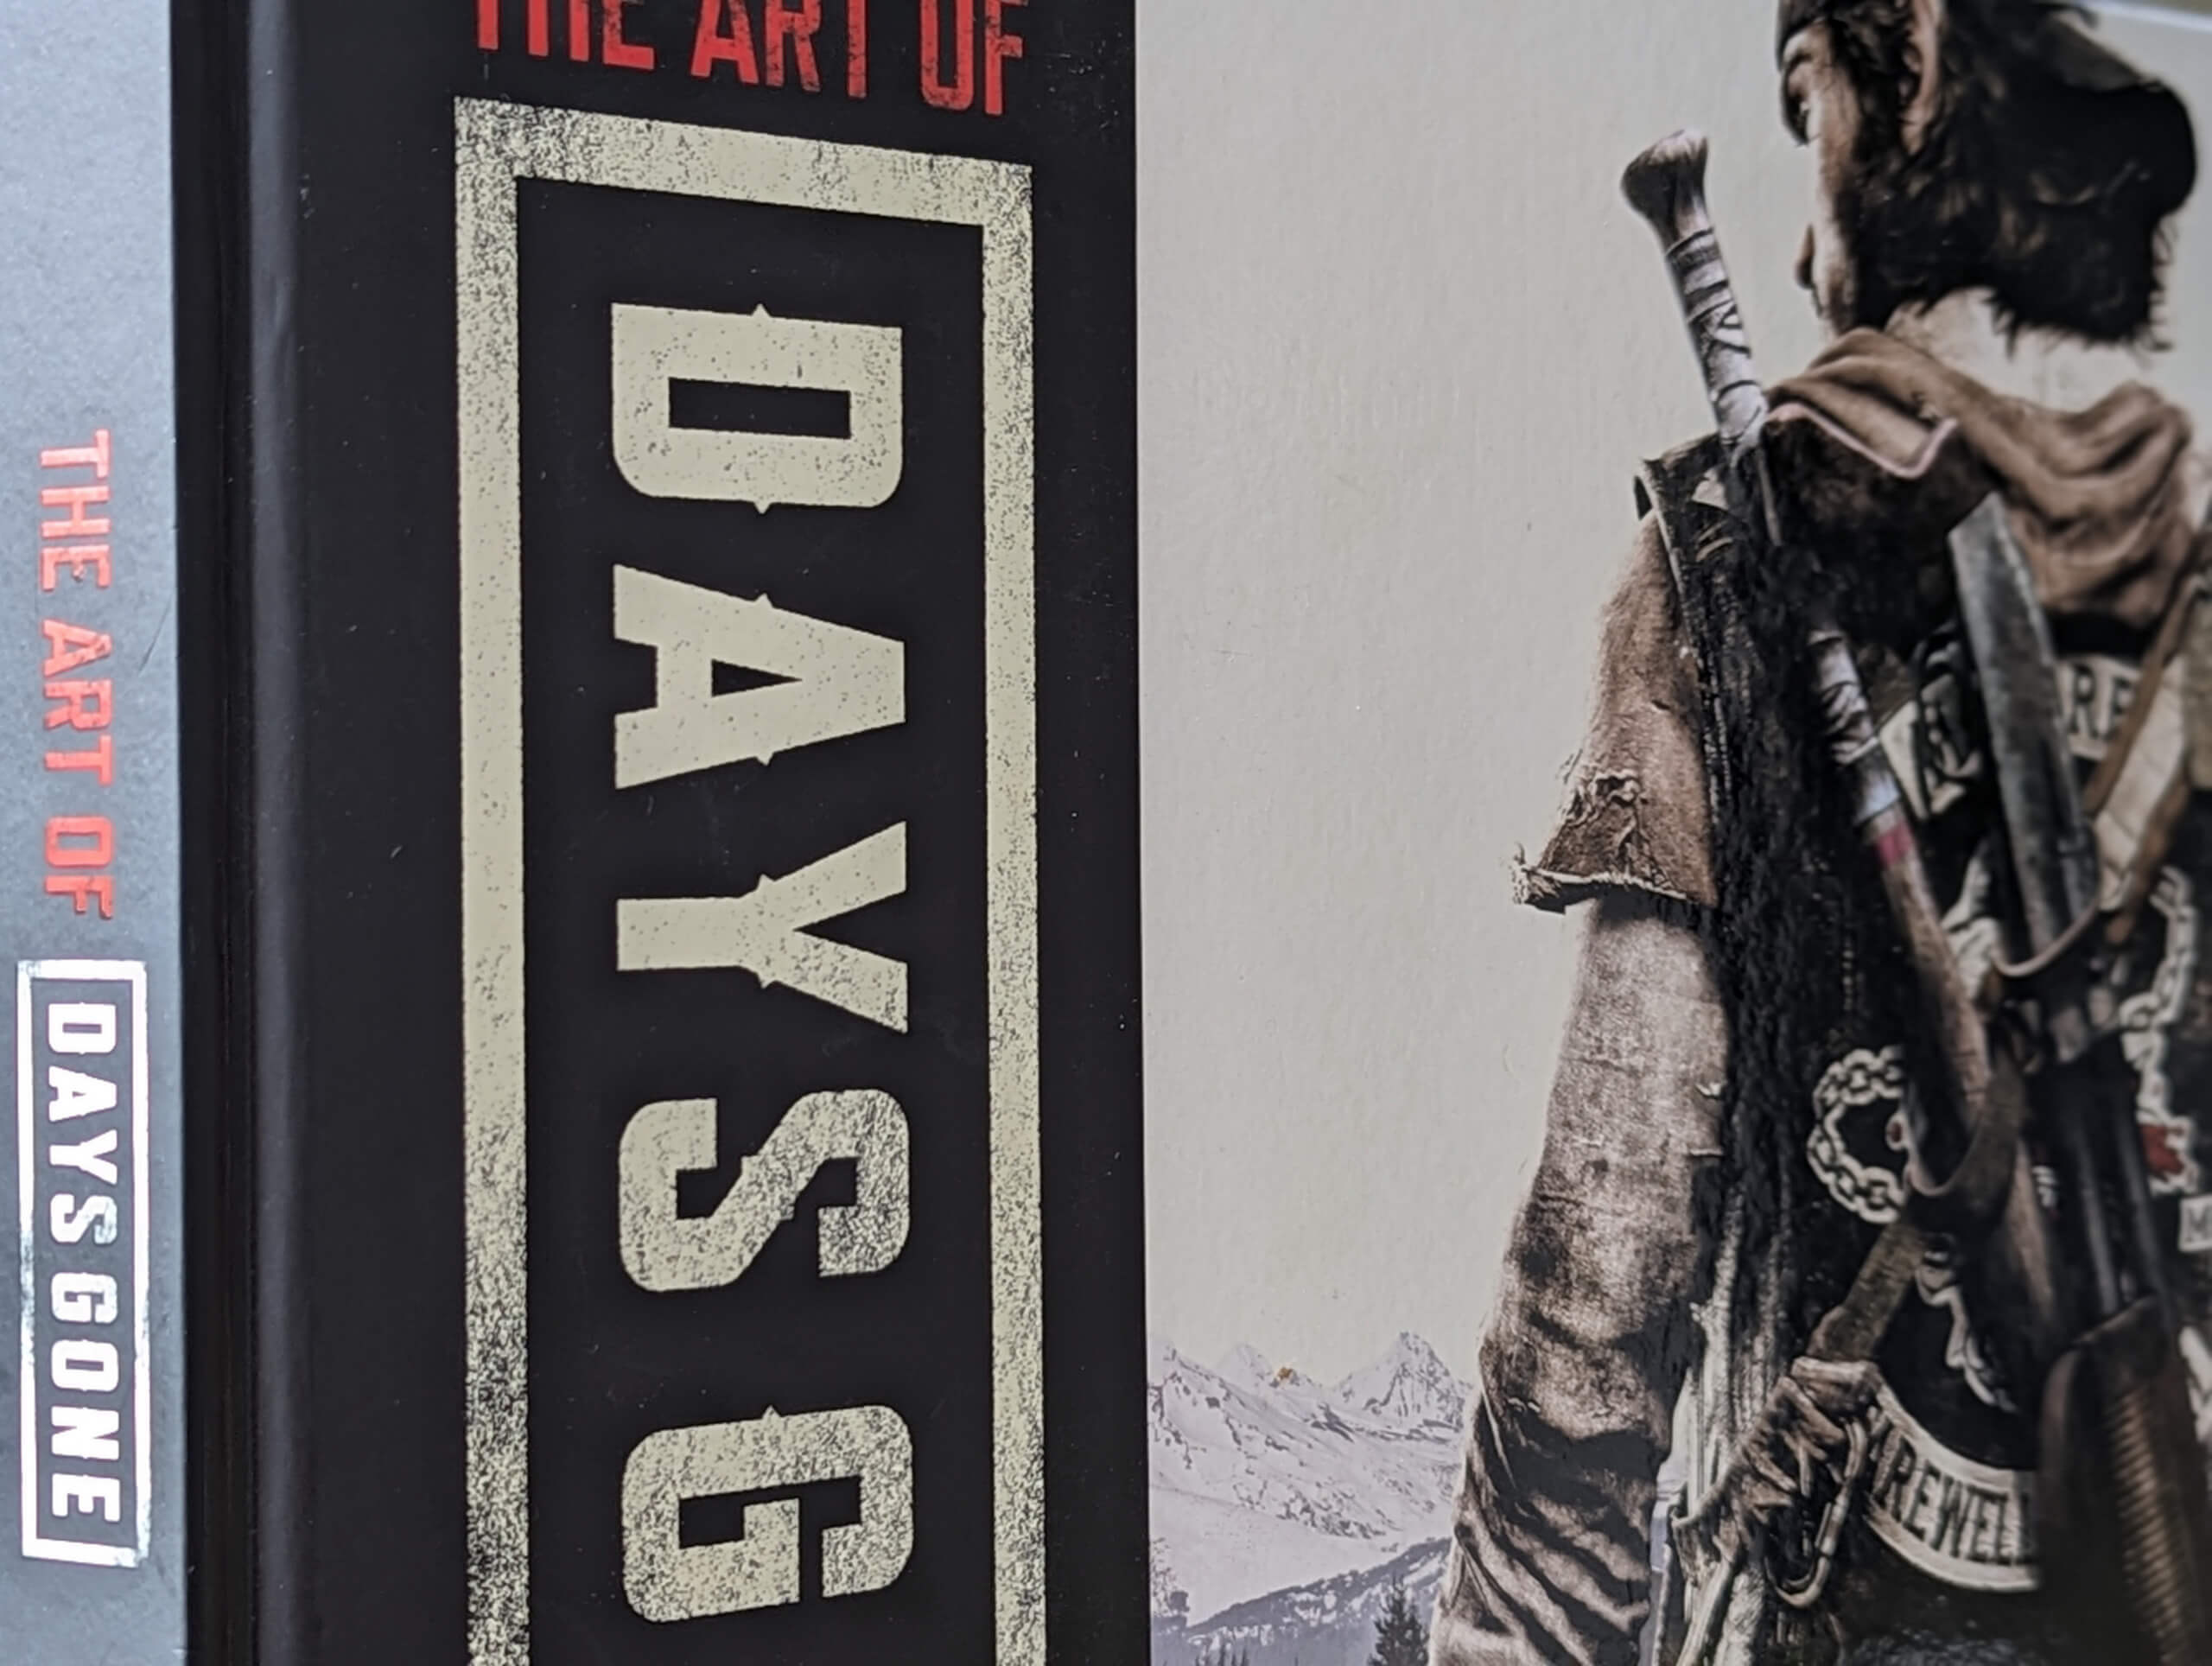 the front cover and spine of the Artbook "The Art Of Days Gone"